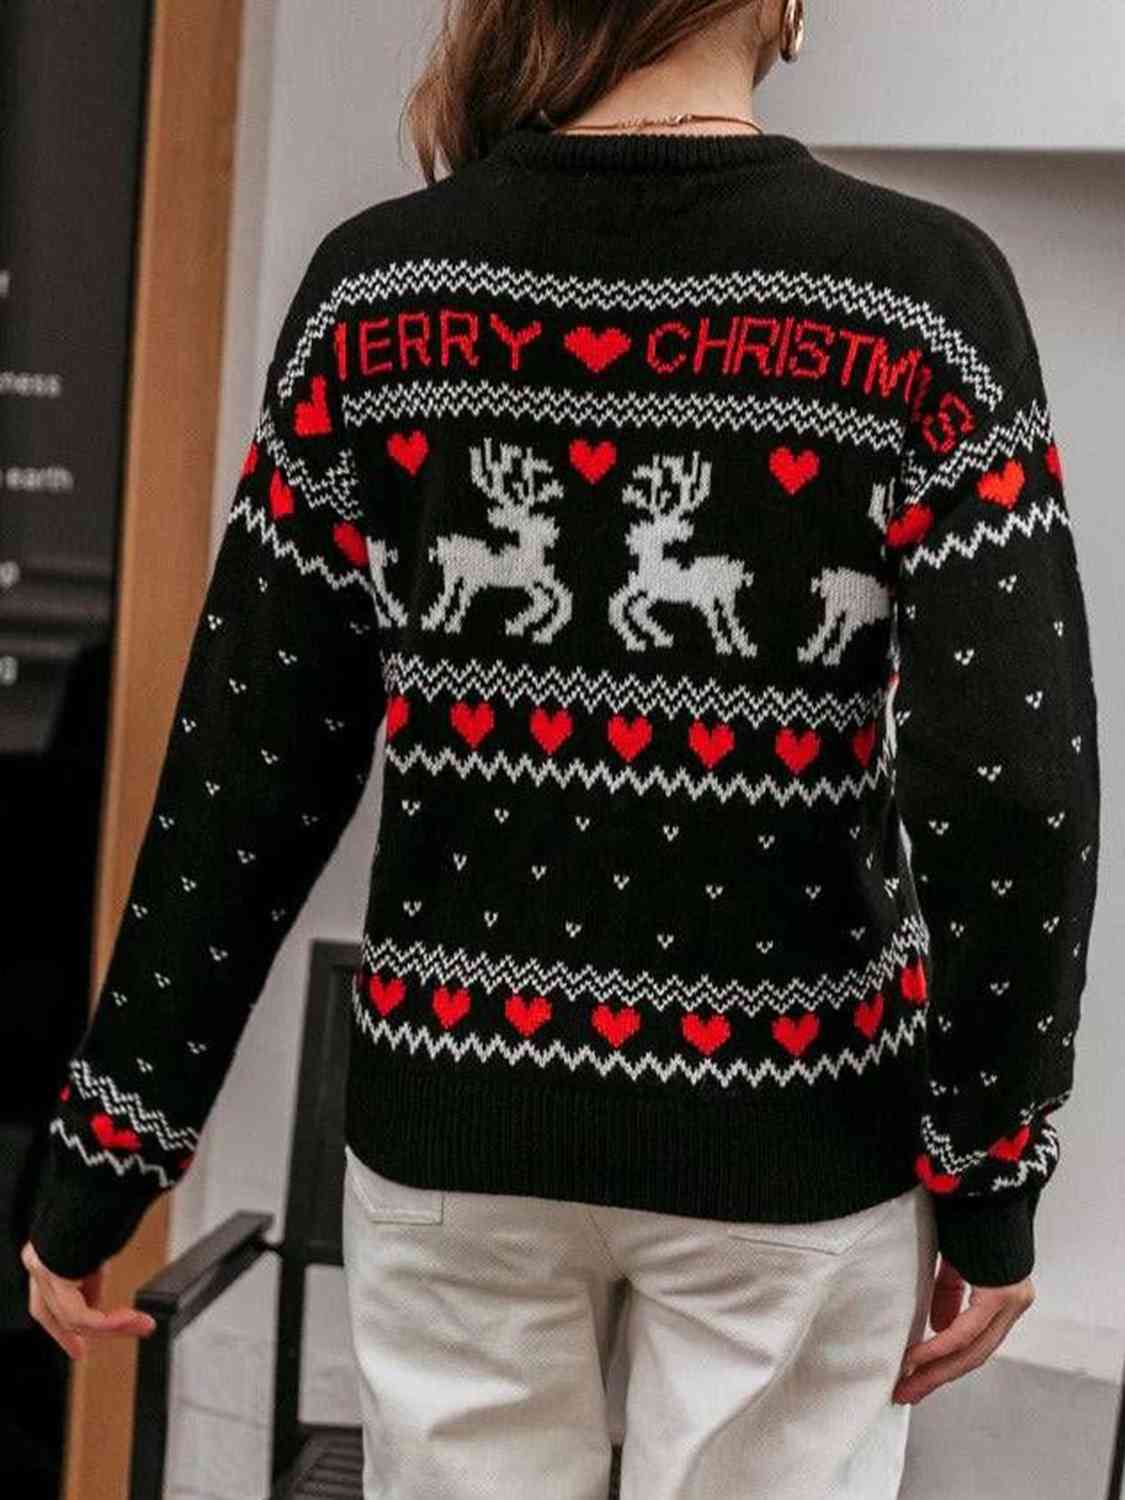 Deerly Beloved Christmas Knitted Sweater